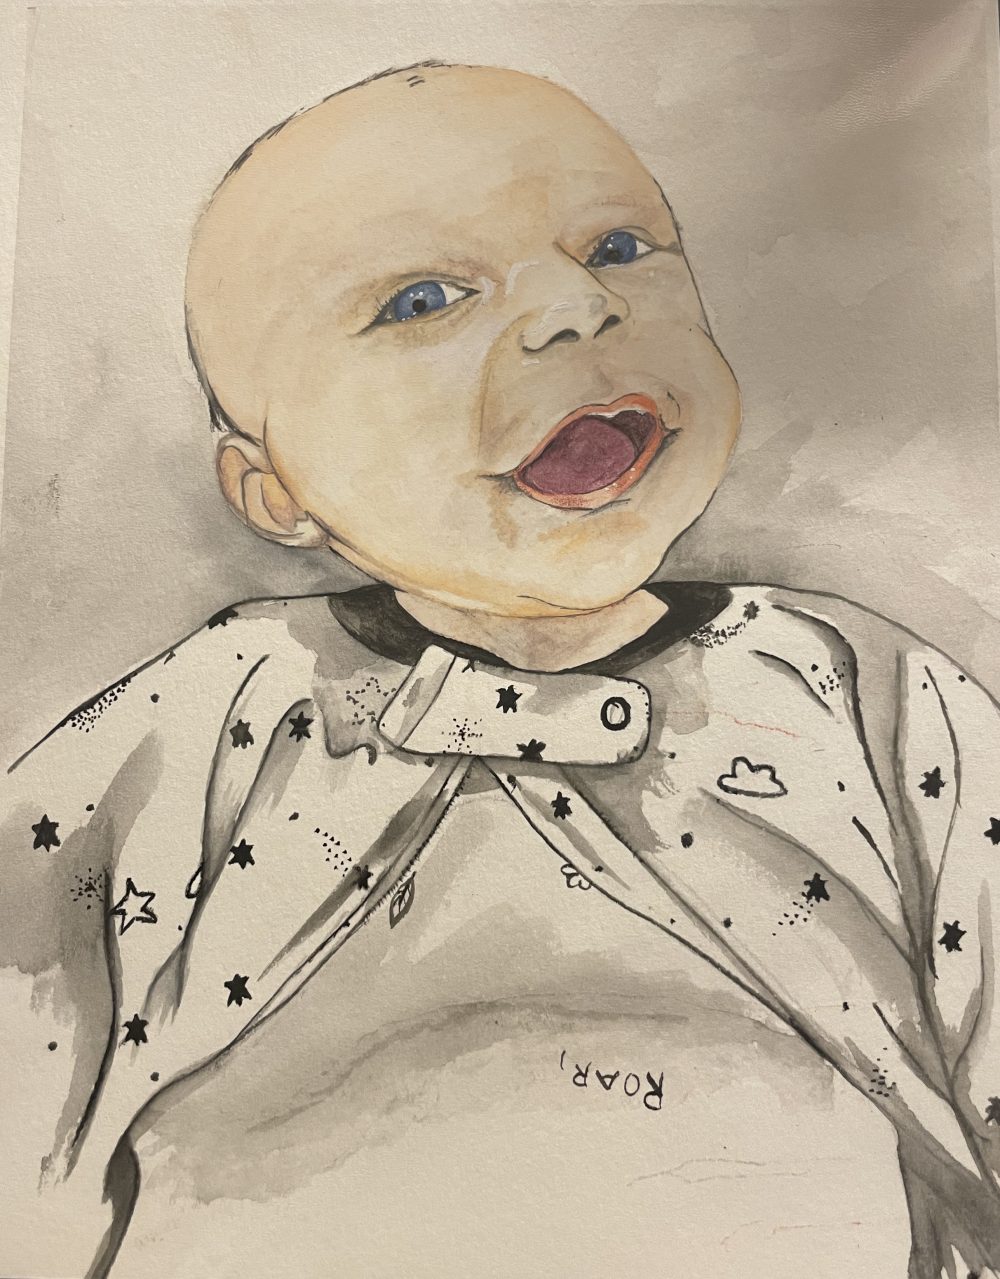 Watercolor portrait of a baby with a blank background.